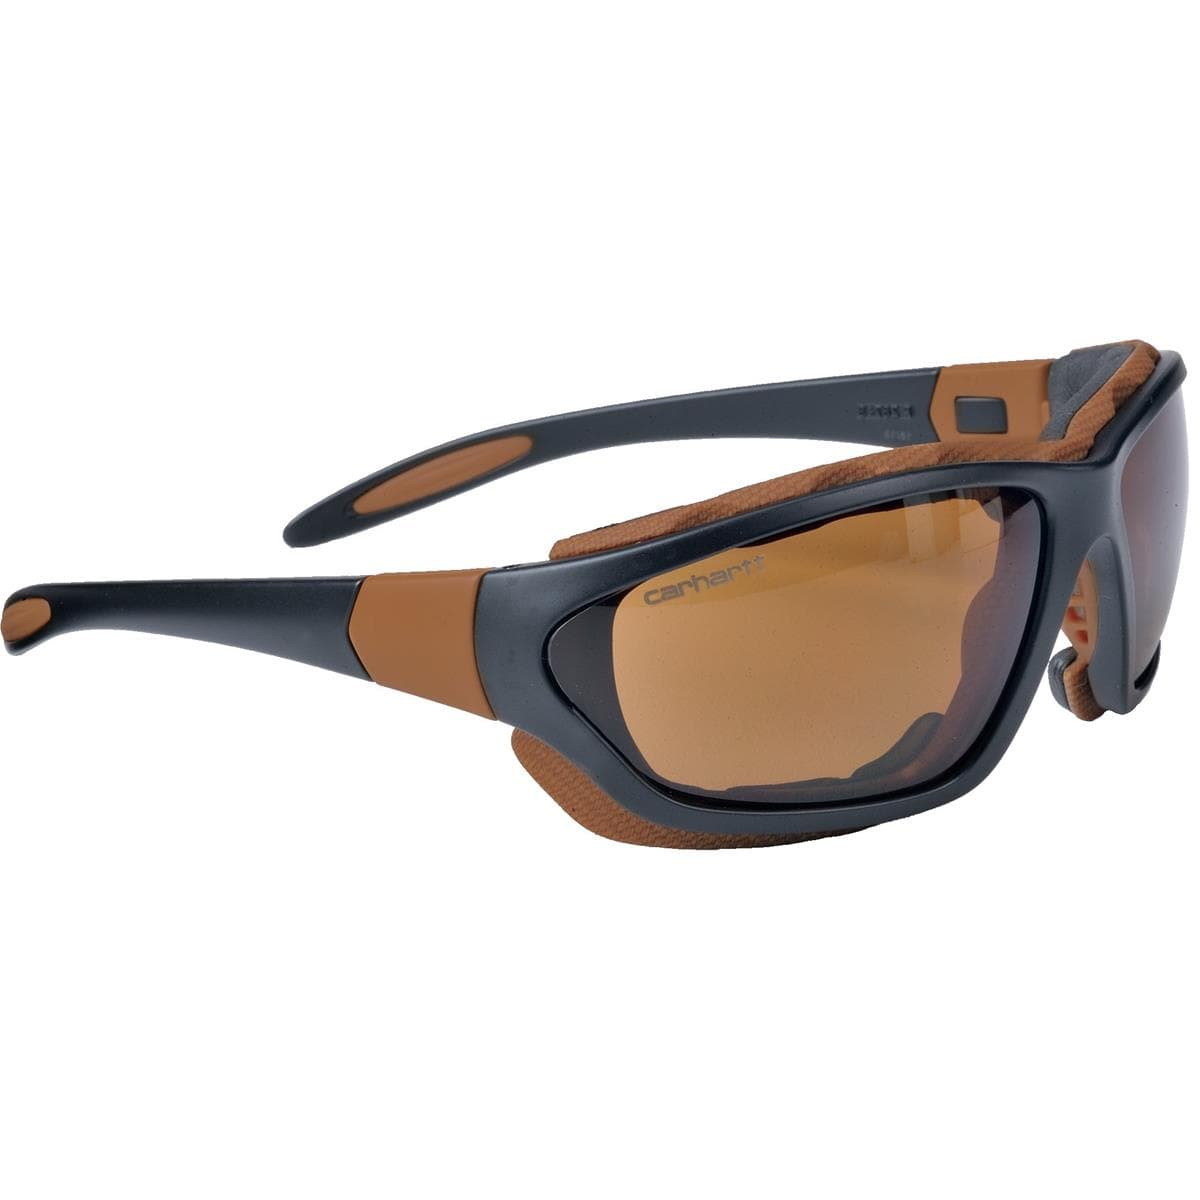 Carhartt Carthage Sealed Safety Glasses/Goggles